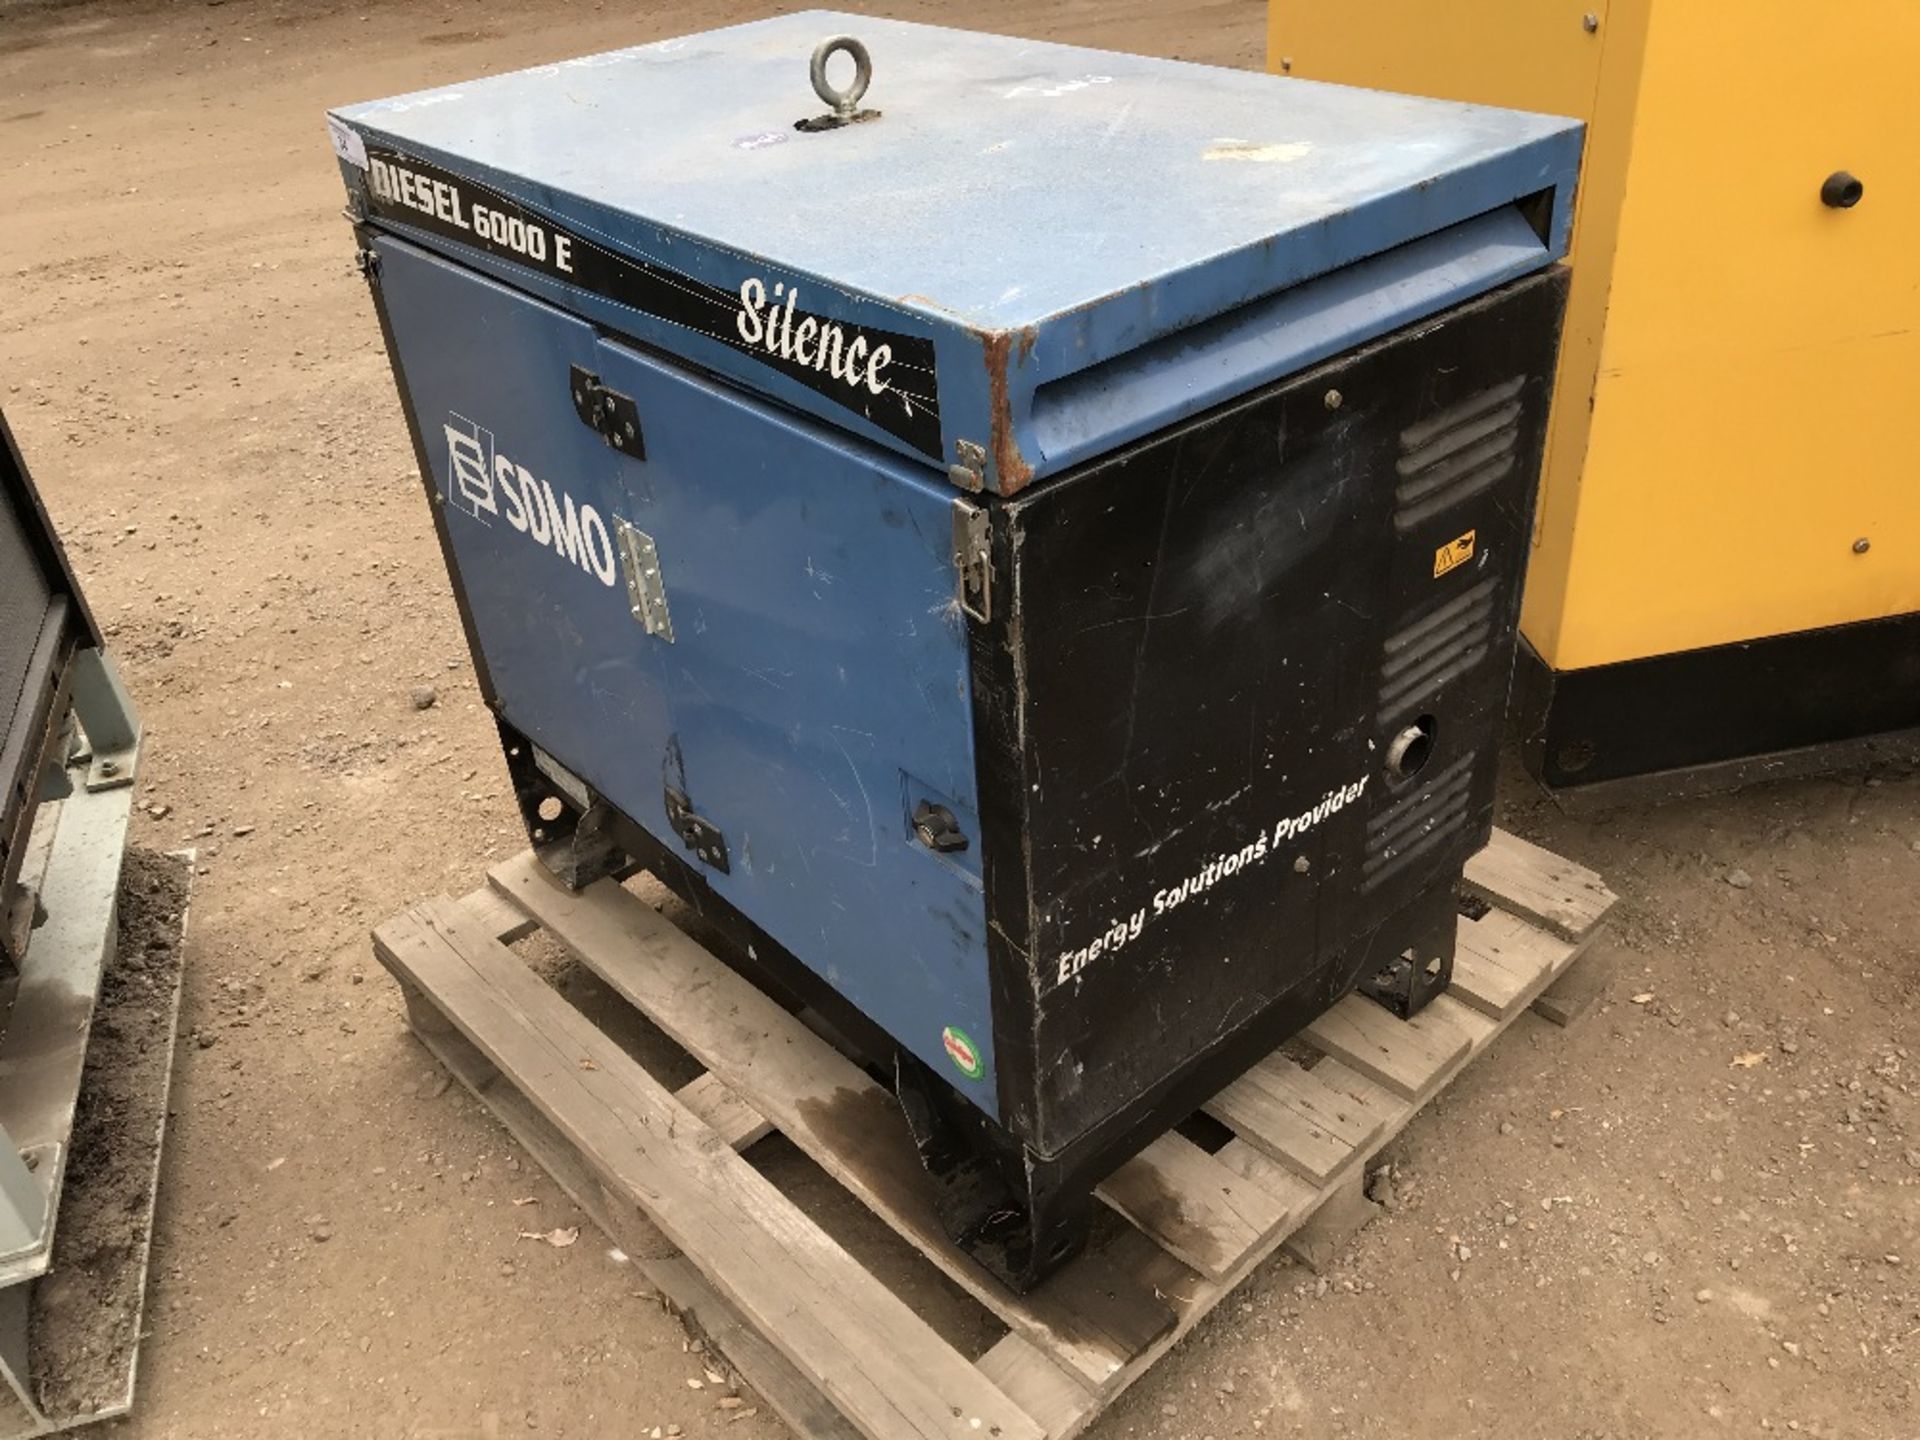 SDMO DIESEL 6000E SKID GENERATOR WHEN TESTED WAS SEEN TO RUN AND MAKE POWER..NOT LOAD TESTED